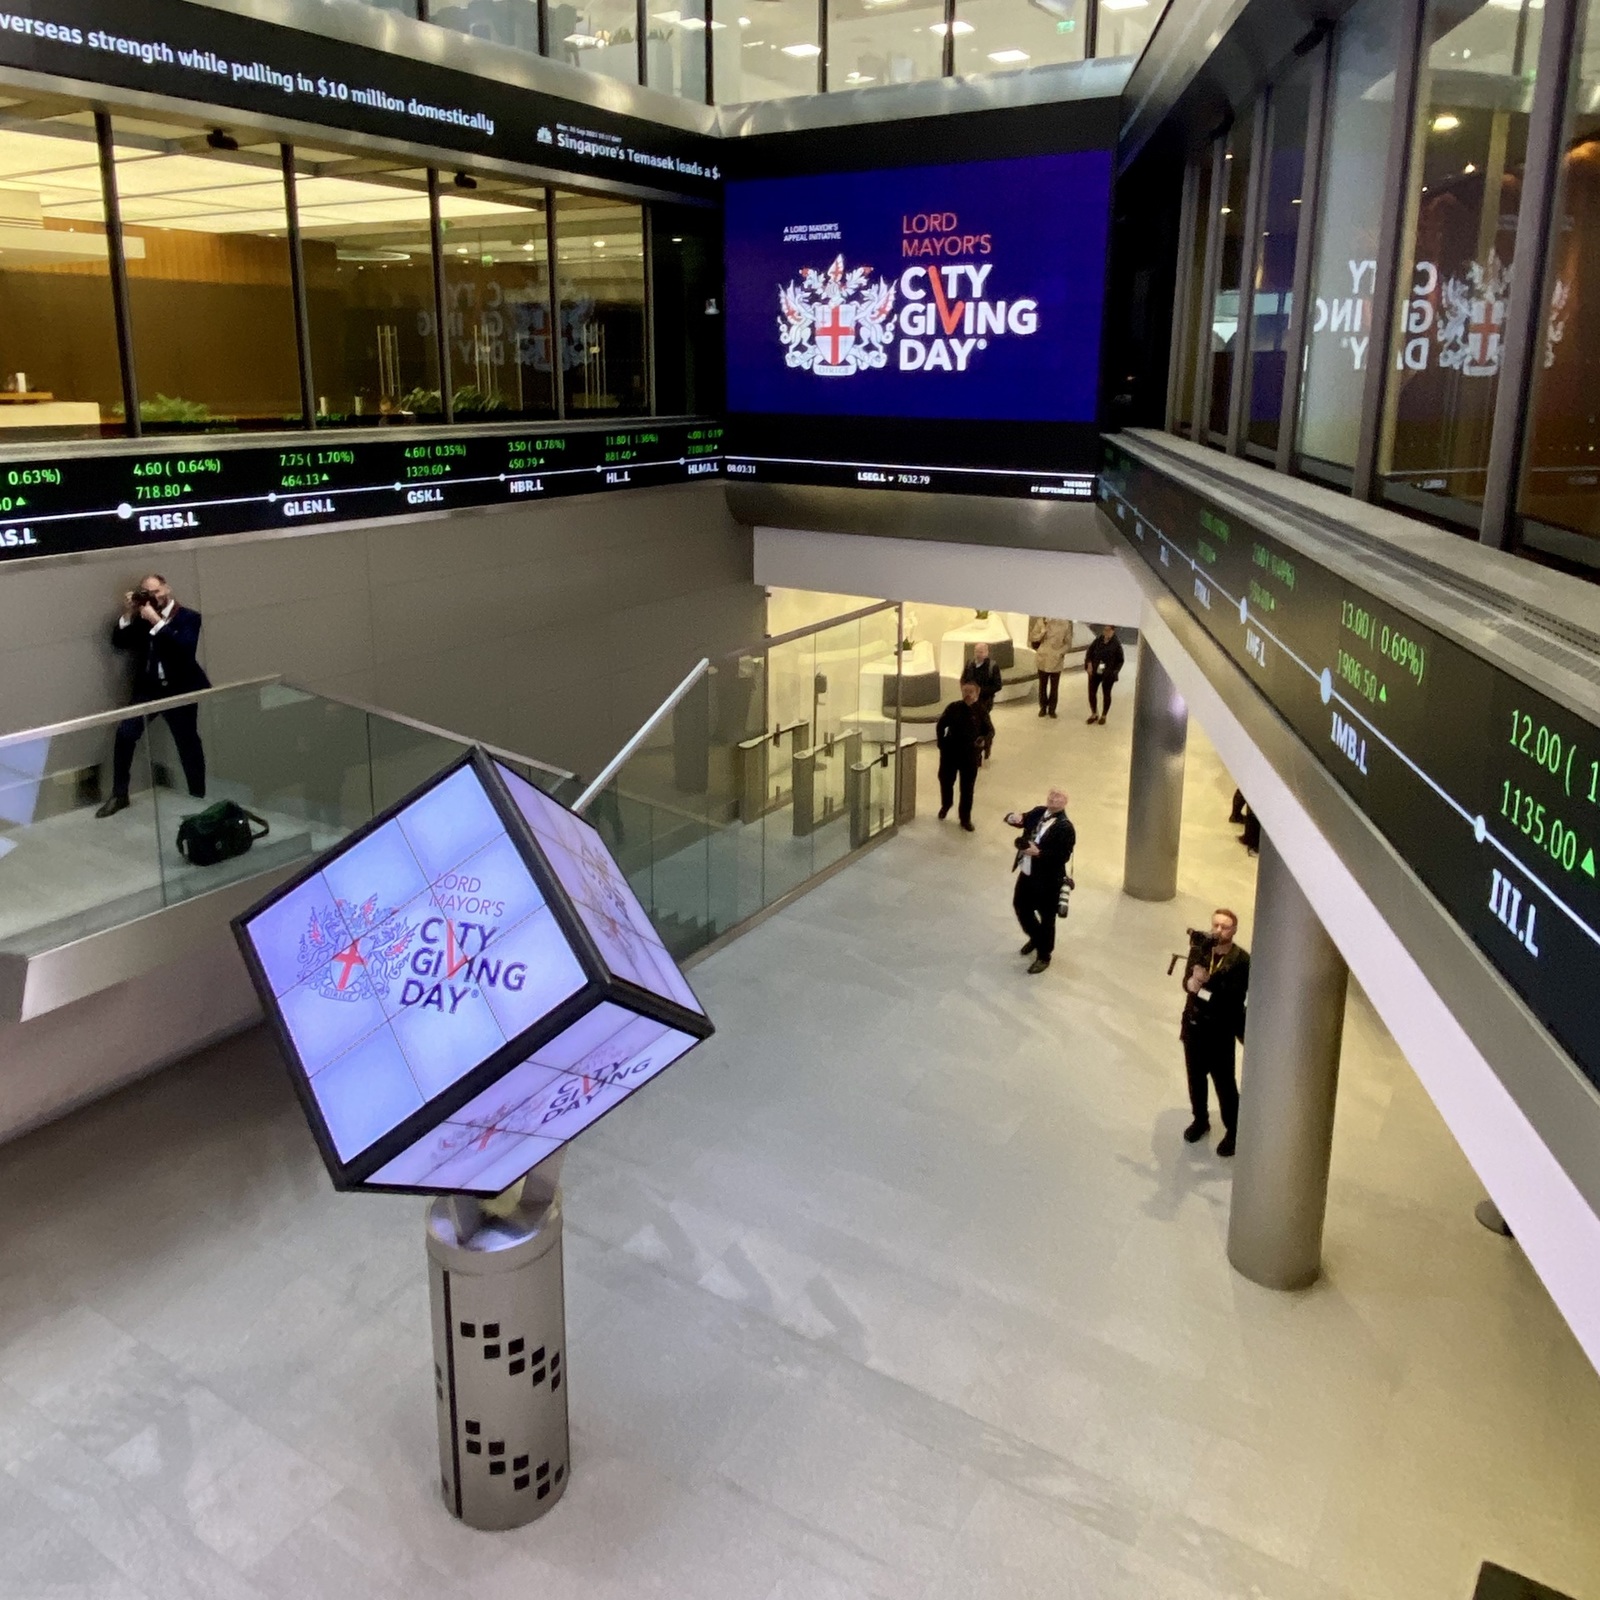 27 Sept 22 - Attended the opening of the London Stock Exchange  with the Lord Mayor as the start to City Giving Day. Hundreds of businesses have taken part this year. Bravo